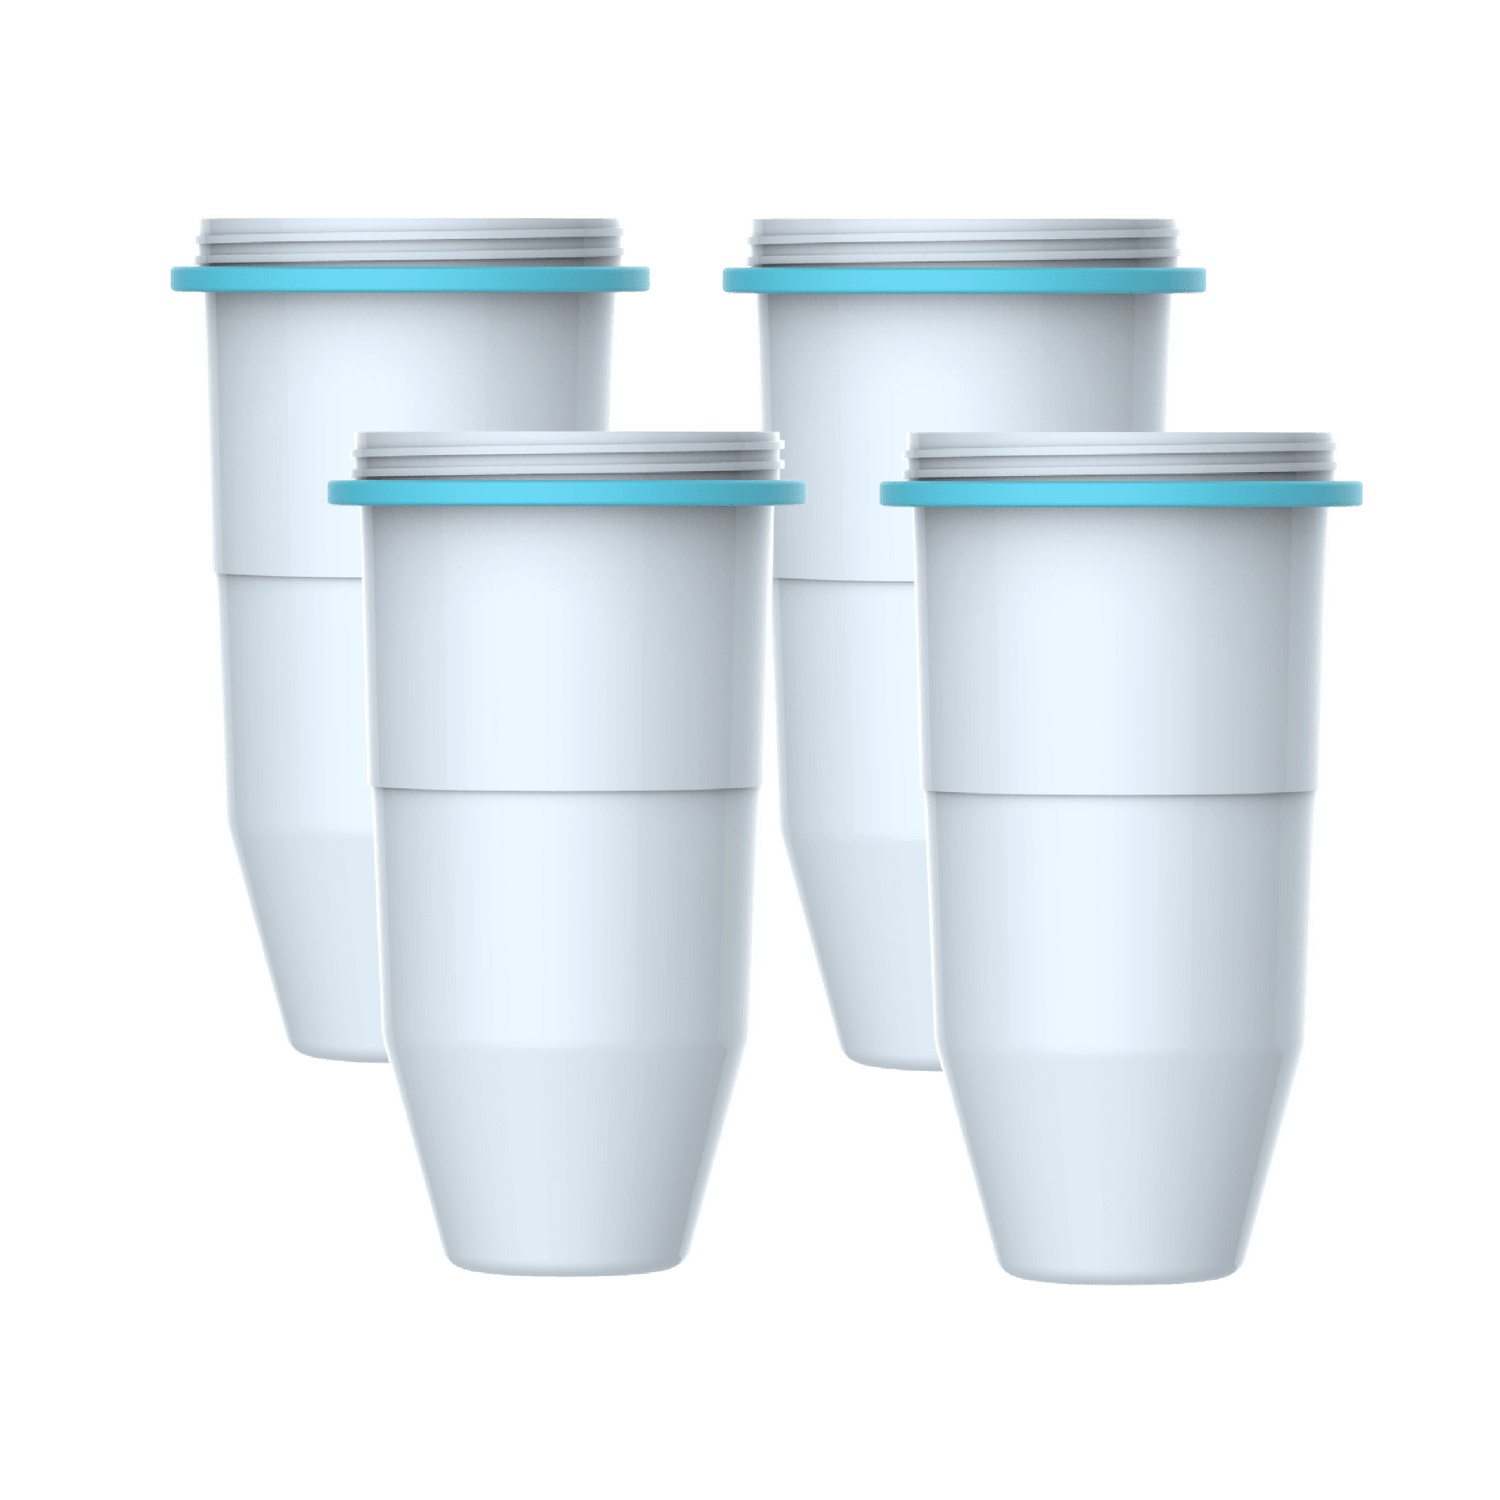 Zerowater 5-Stage Water Filter Replacement - 1 Pack